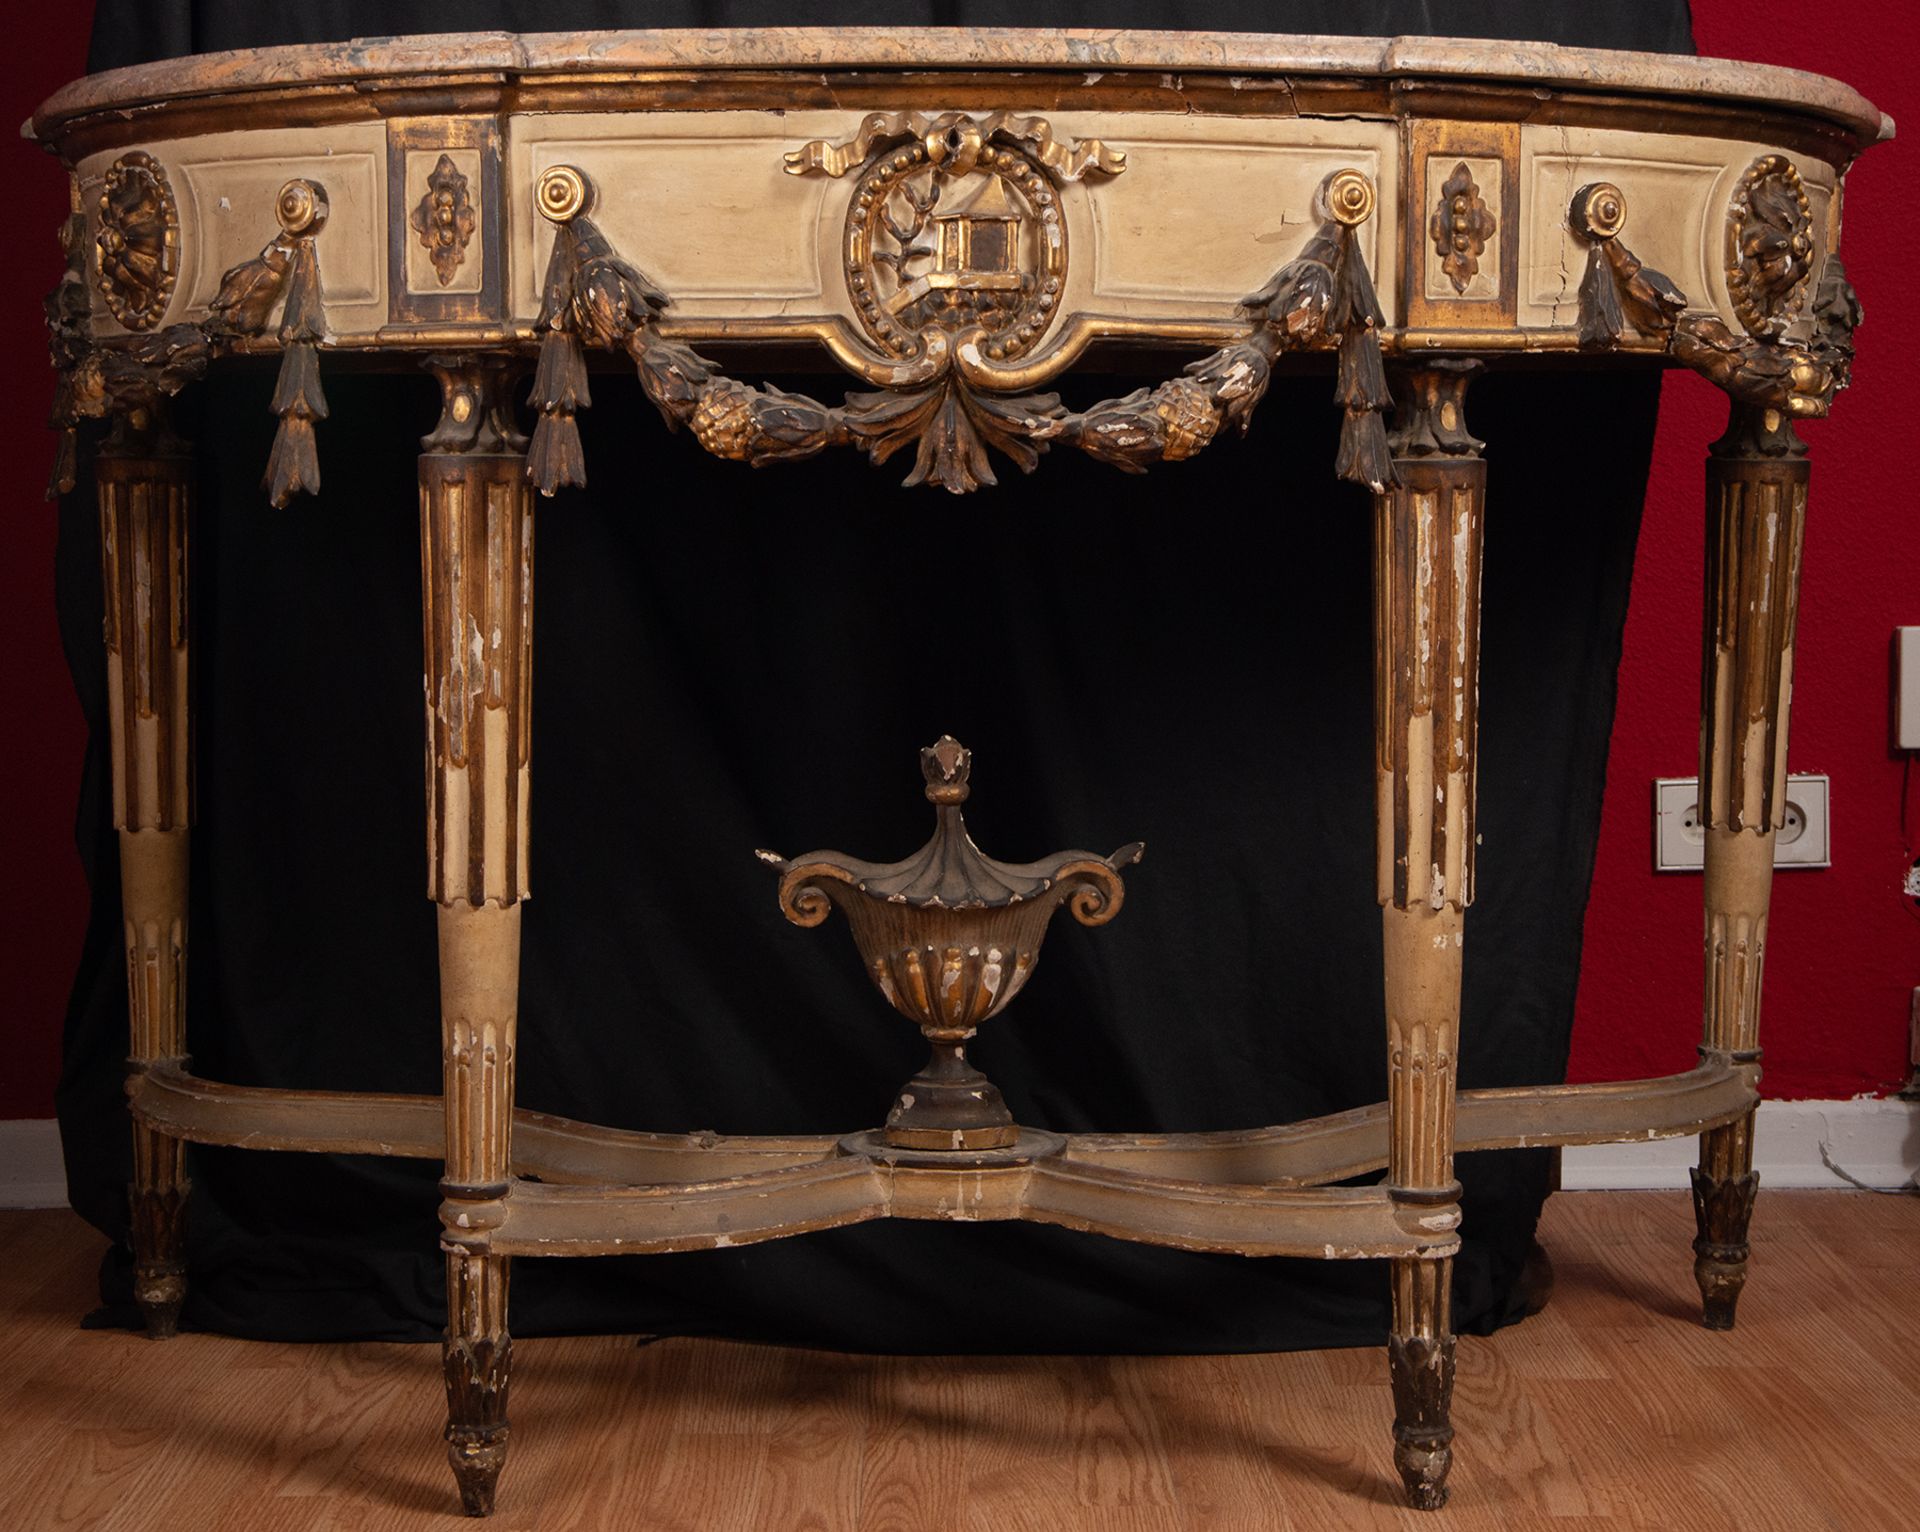 Exceptional 18th century Italian console table in gilded and lacquered wood, with a Siena marble top